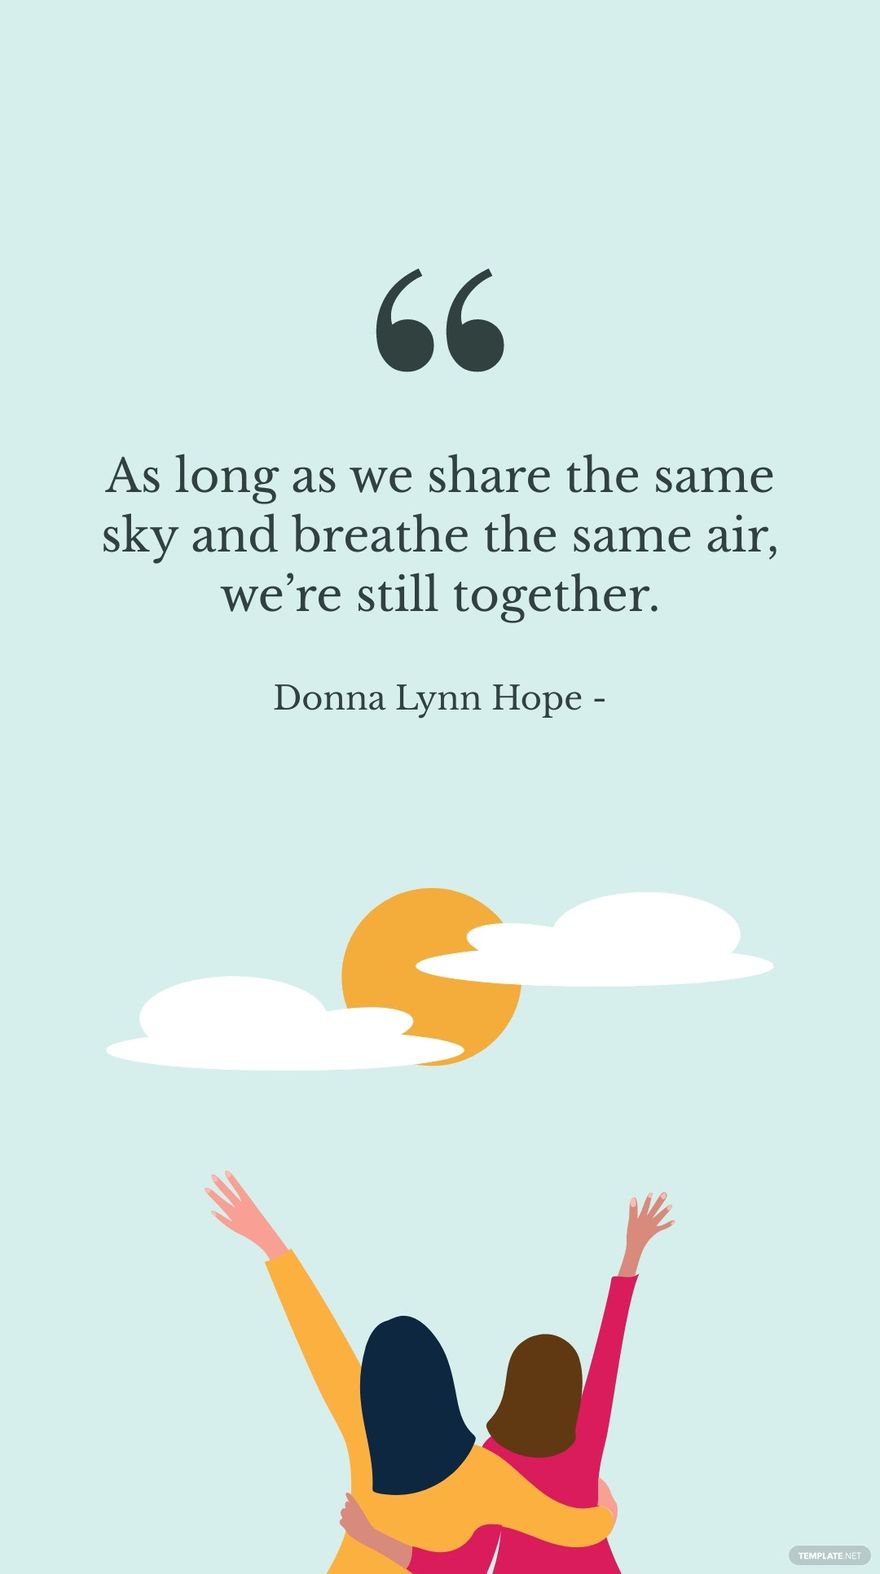 Donna Lynn Hope - As long as we share the same sky and breathe the same air, we’re still together.